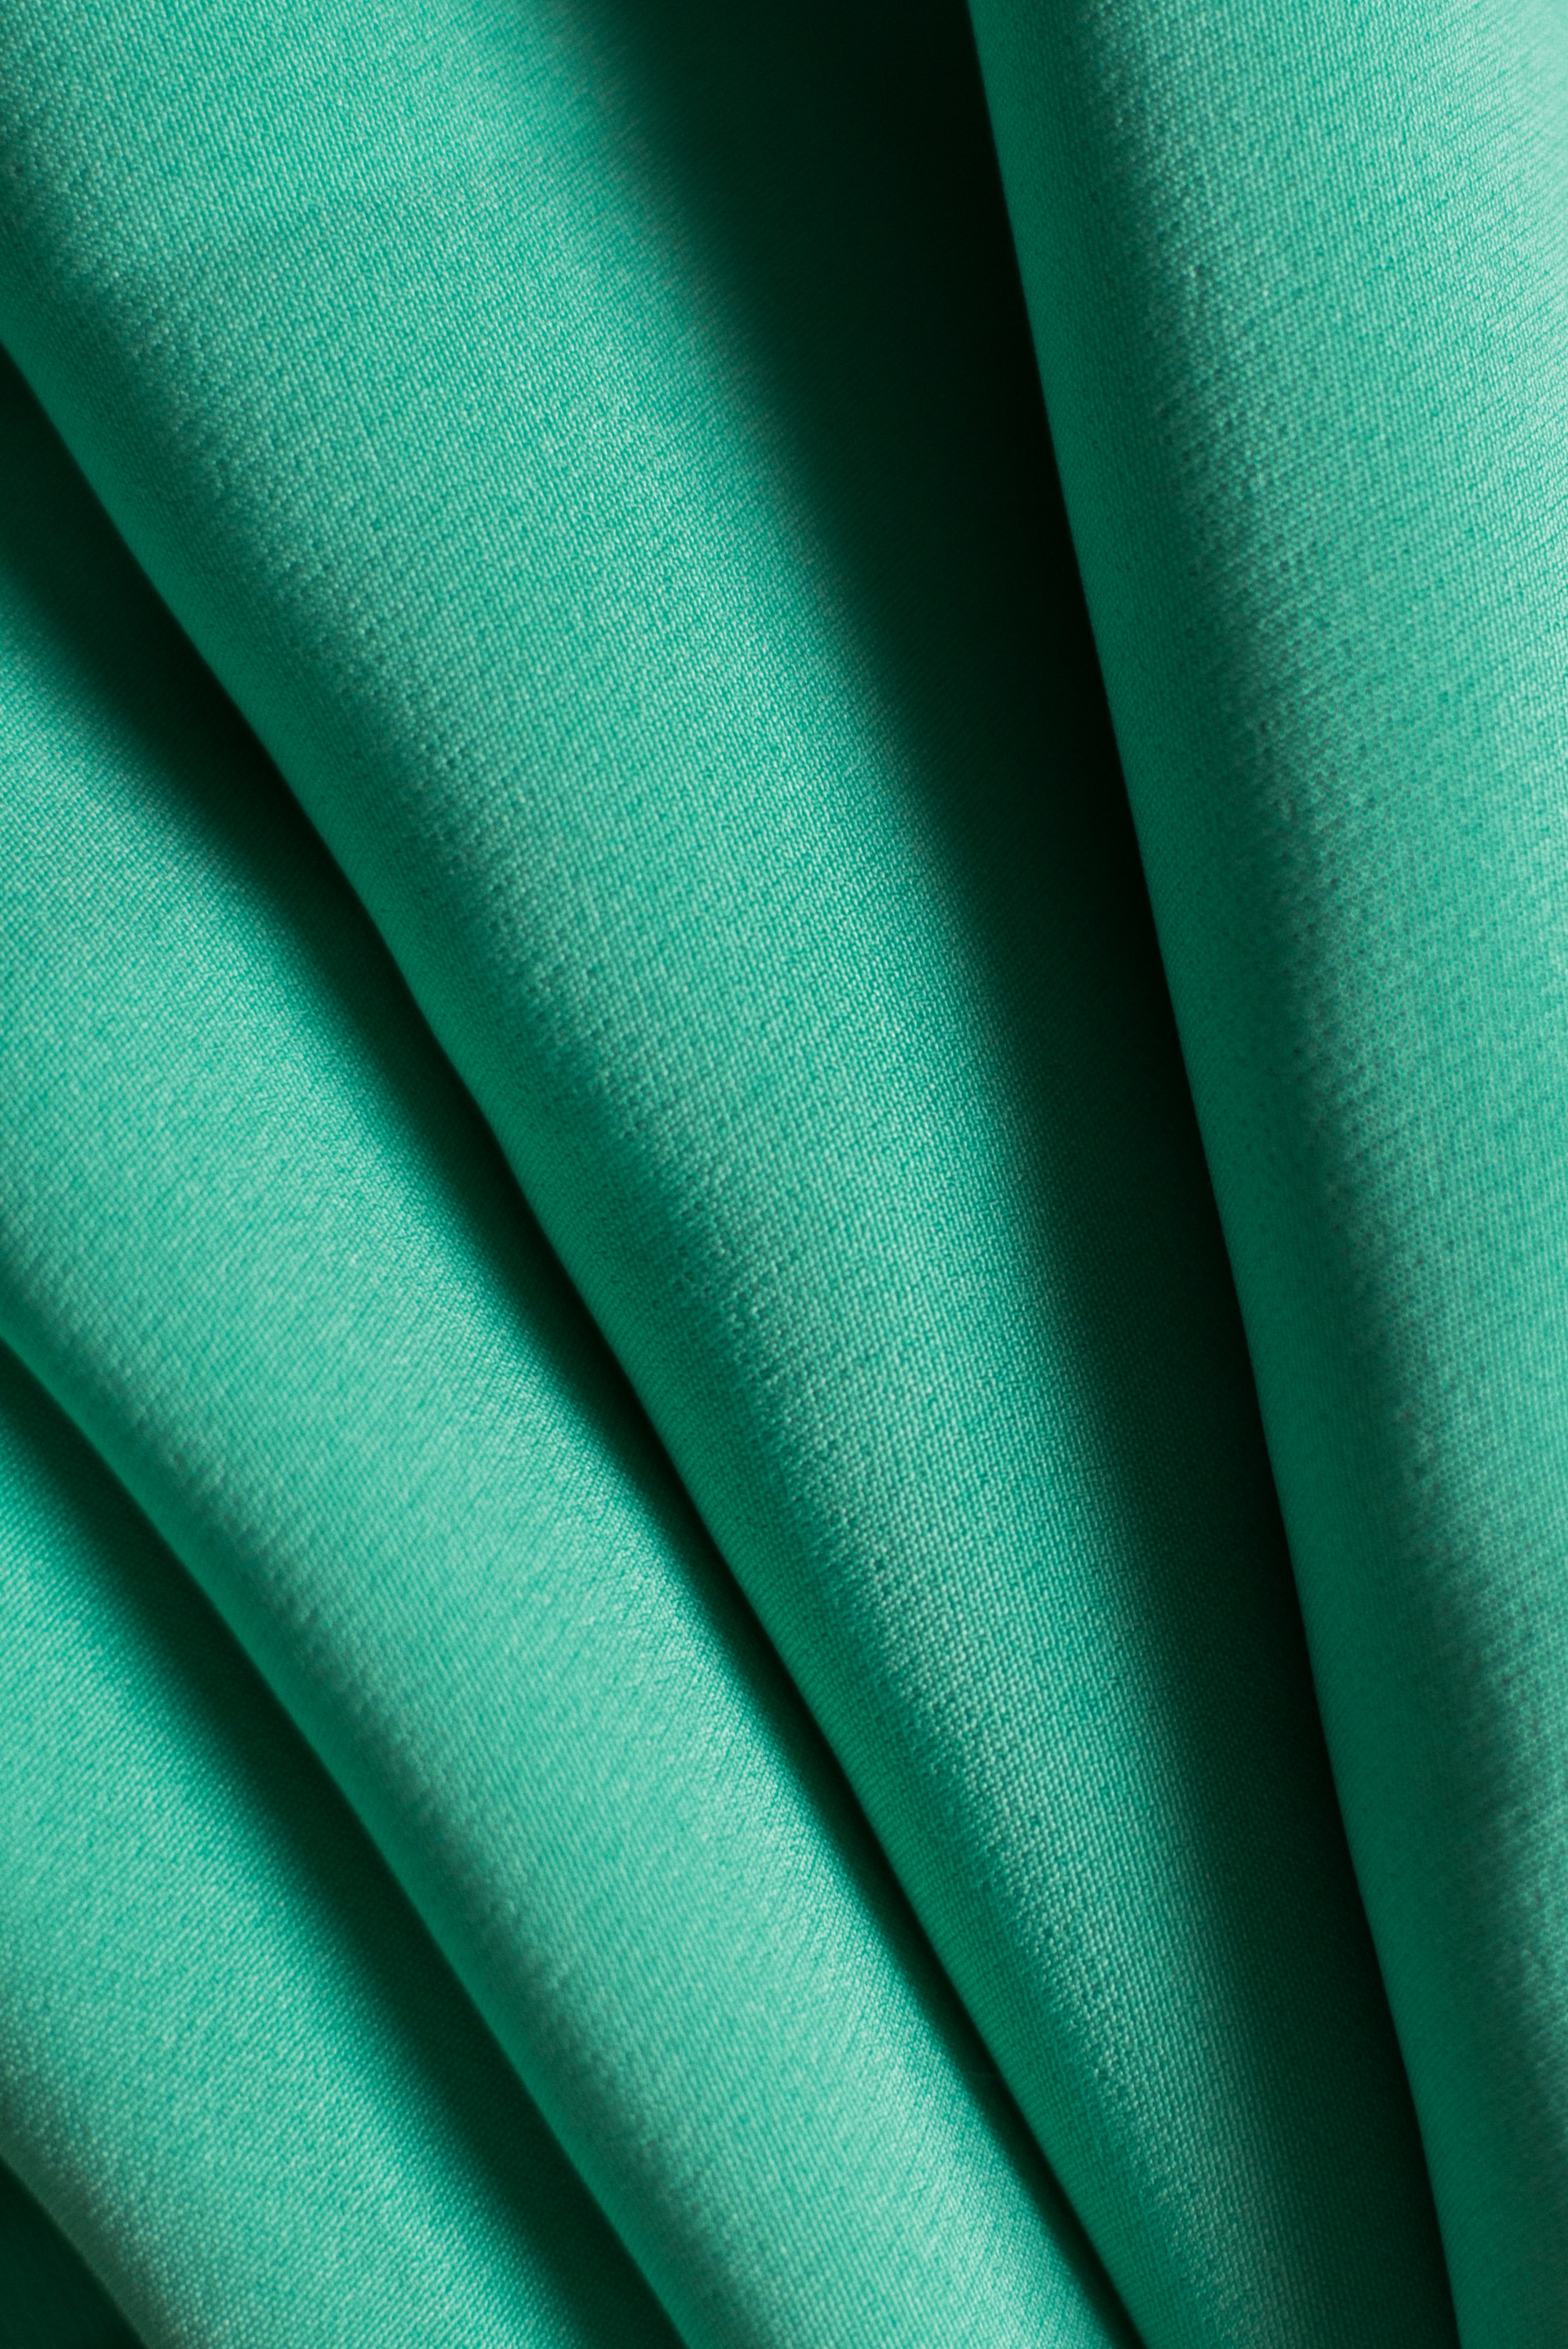 textures, green, texture, cloth, folds, pleating download HD wallpaper